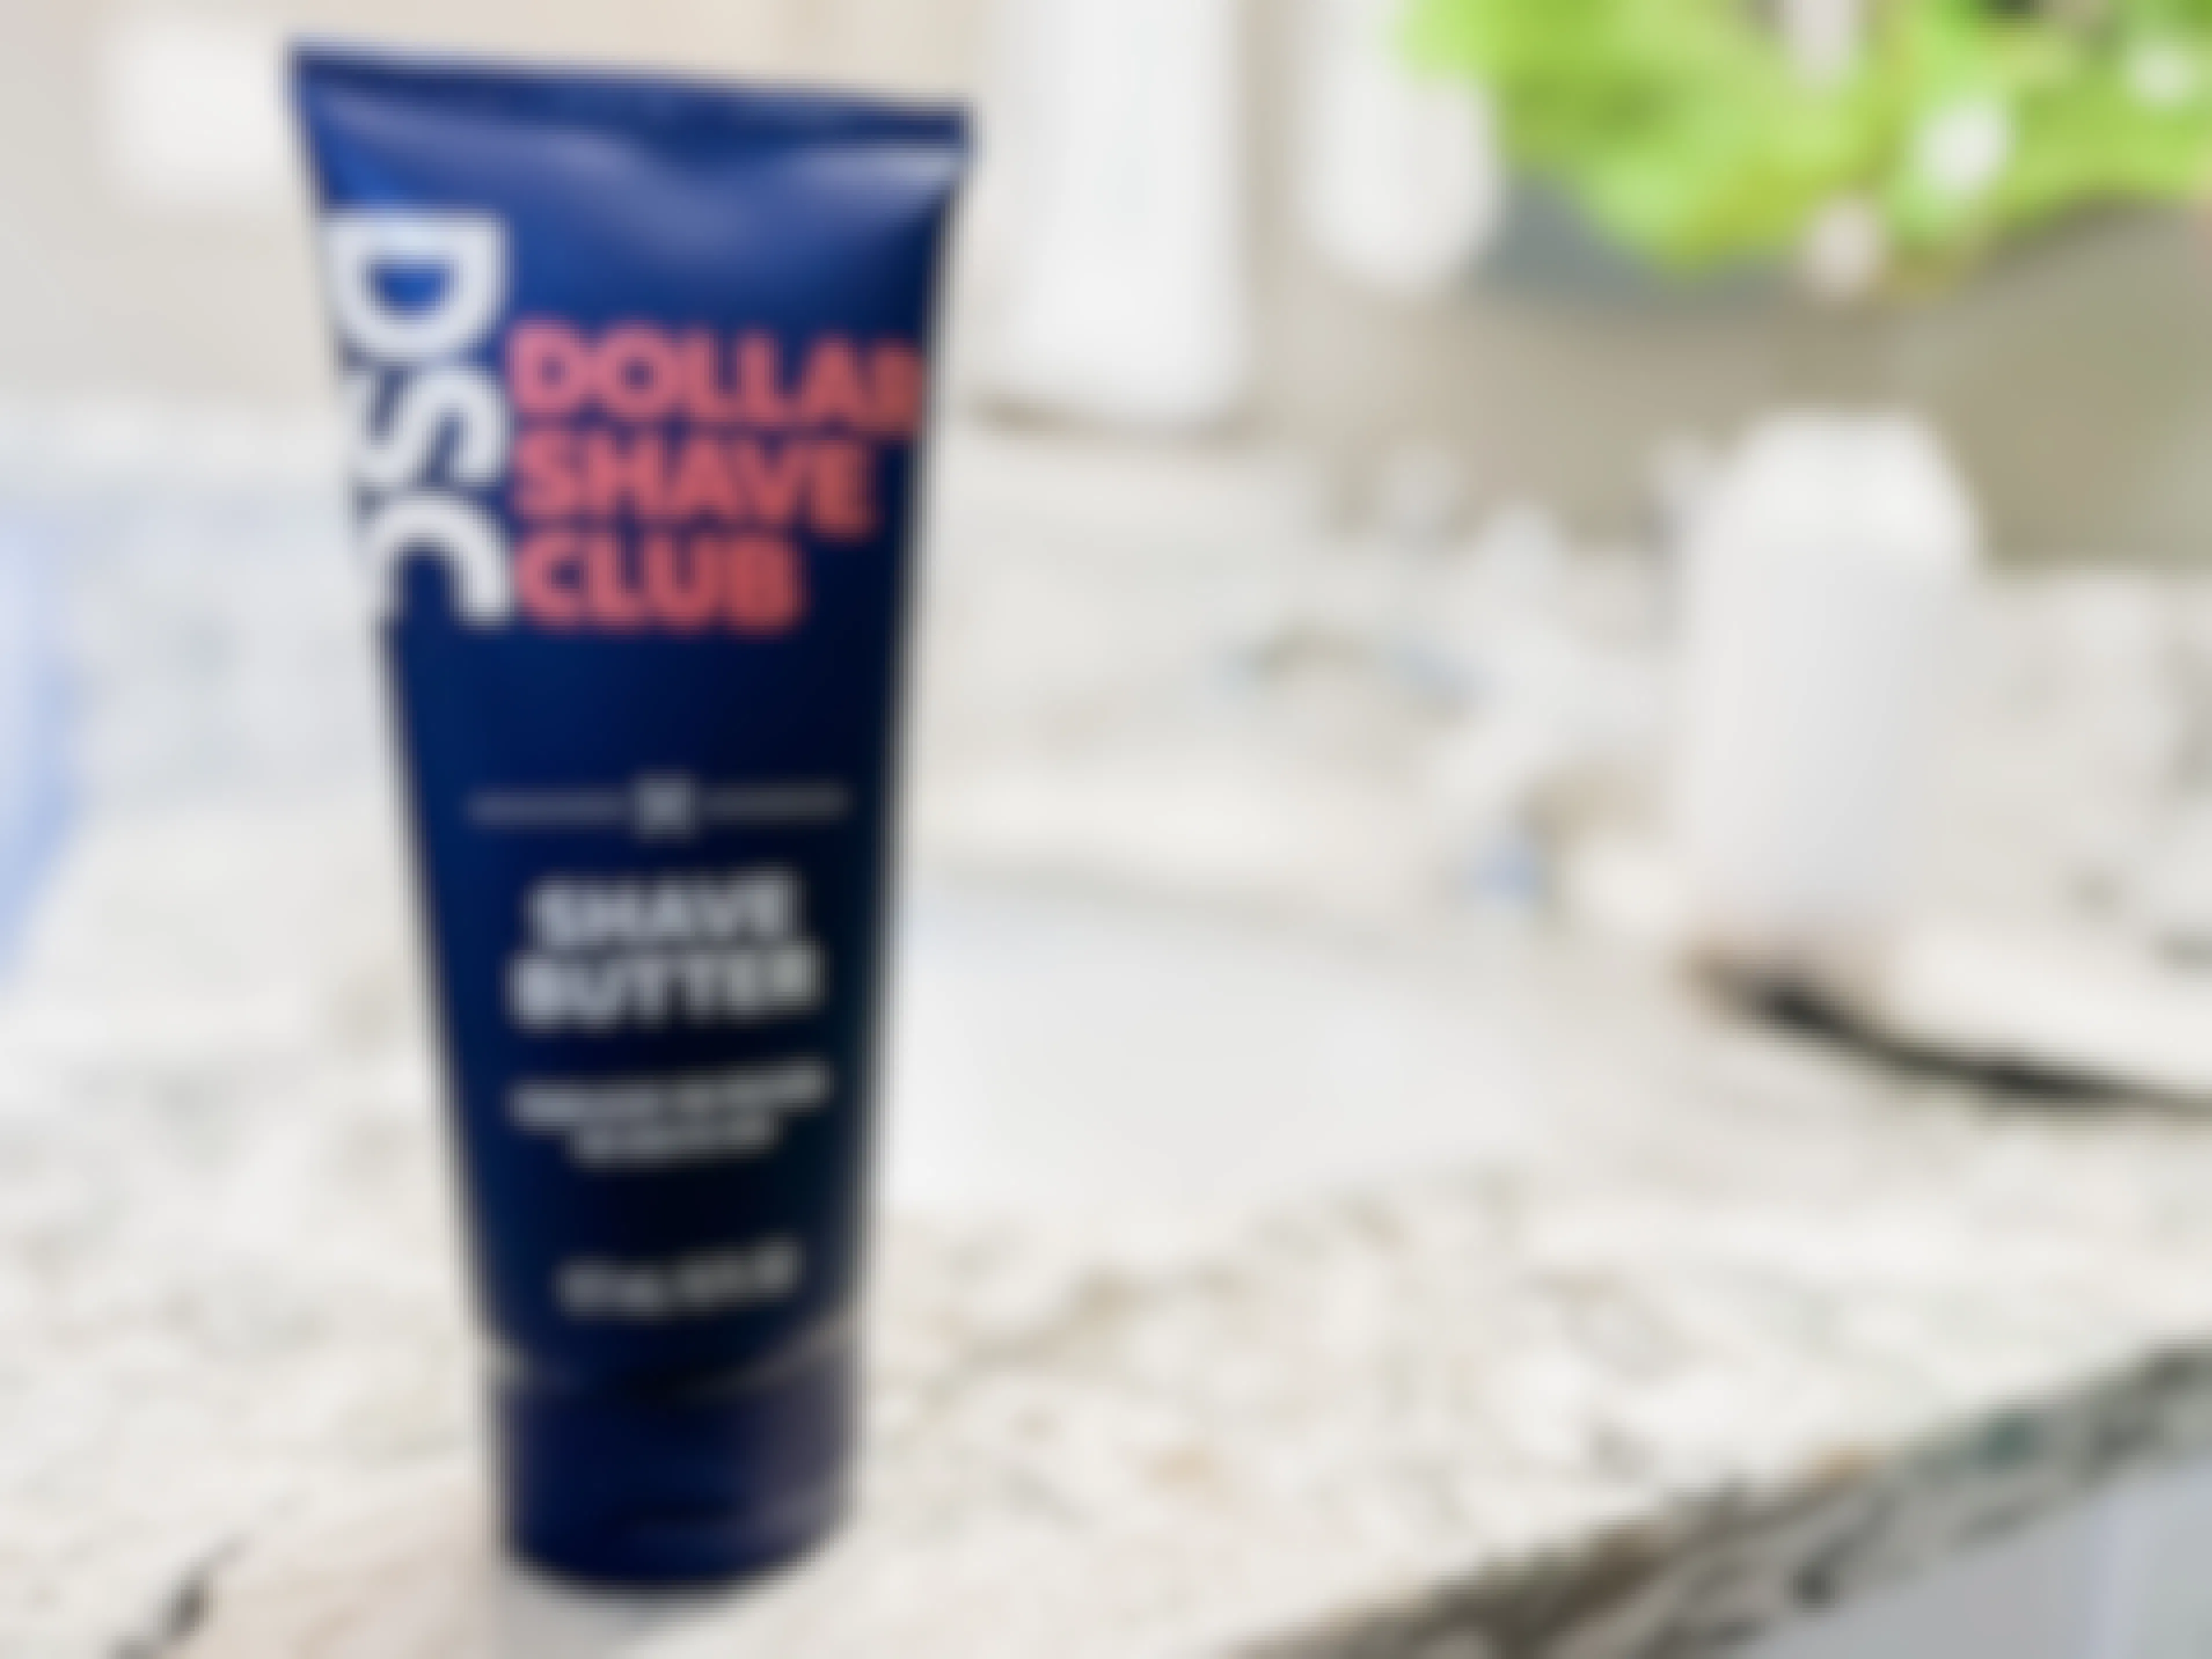 A bottle of the Dollar Shave Club Shave Butter on a bathroom countertop